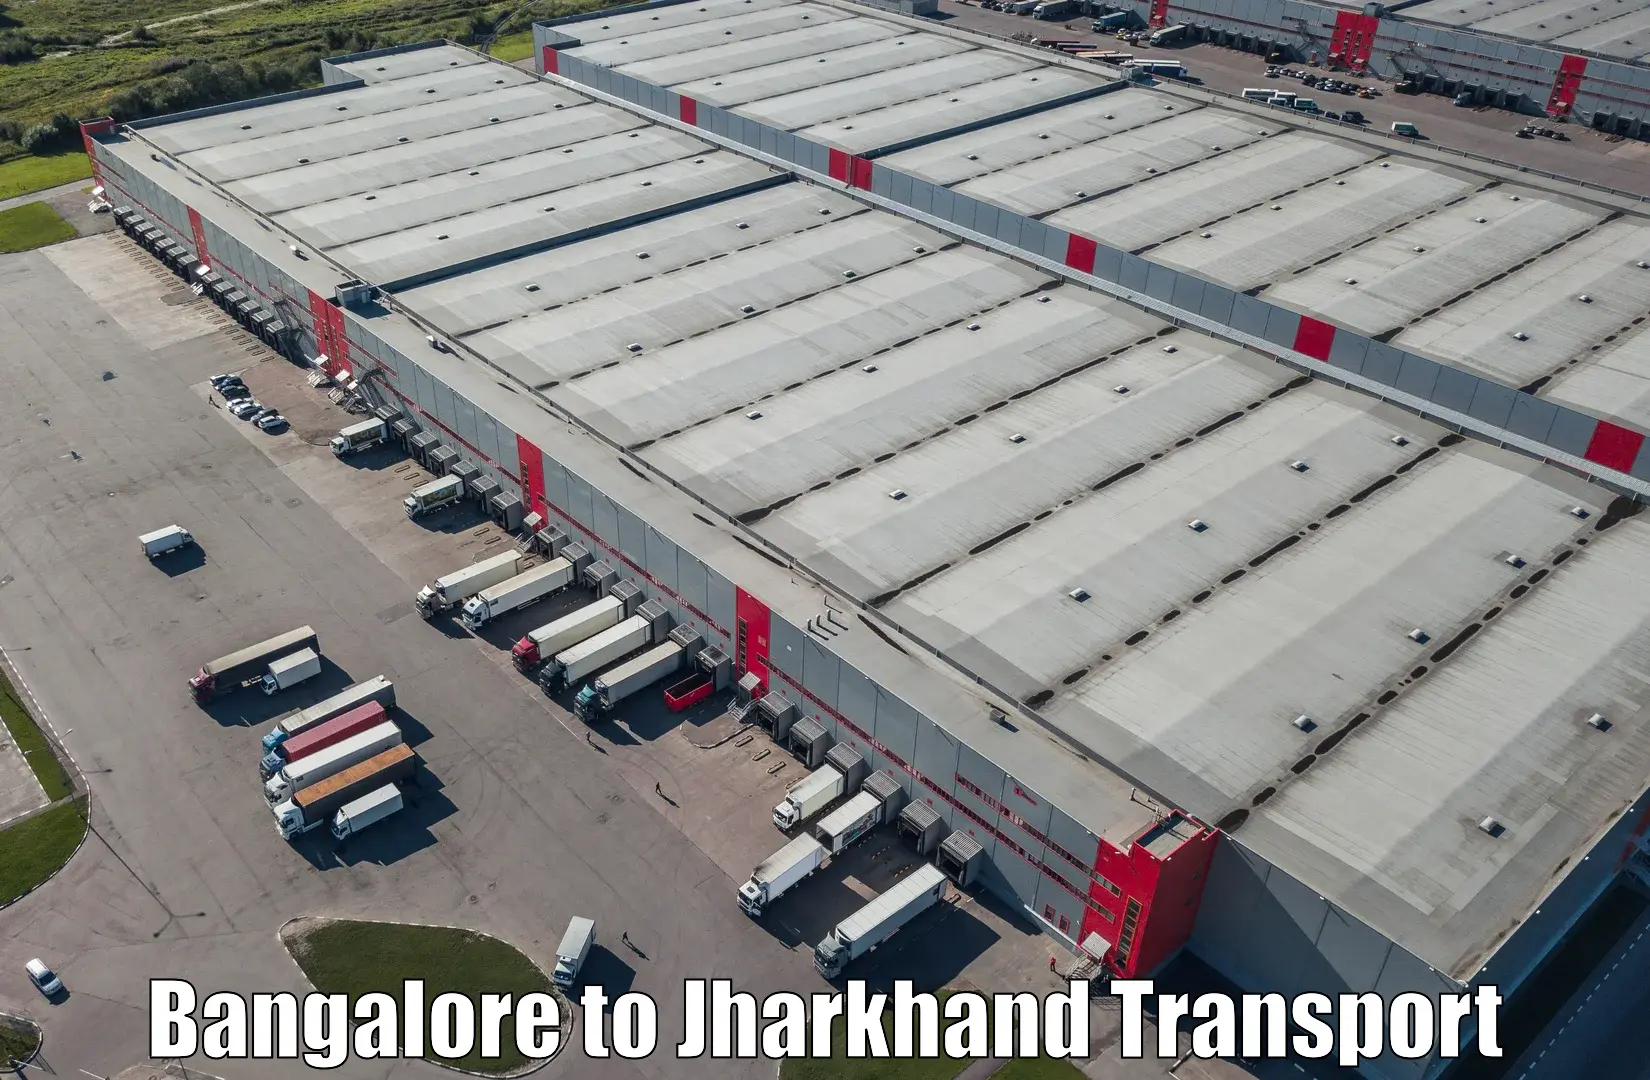 Truck transport companies in India in Bangalore to Barharwa